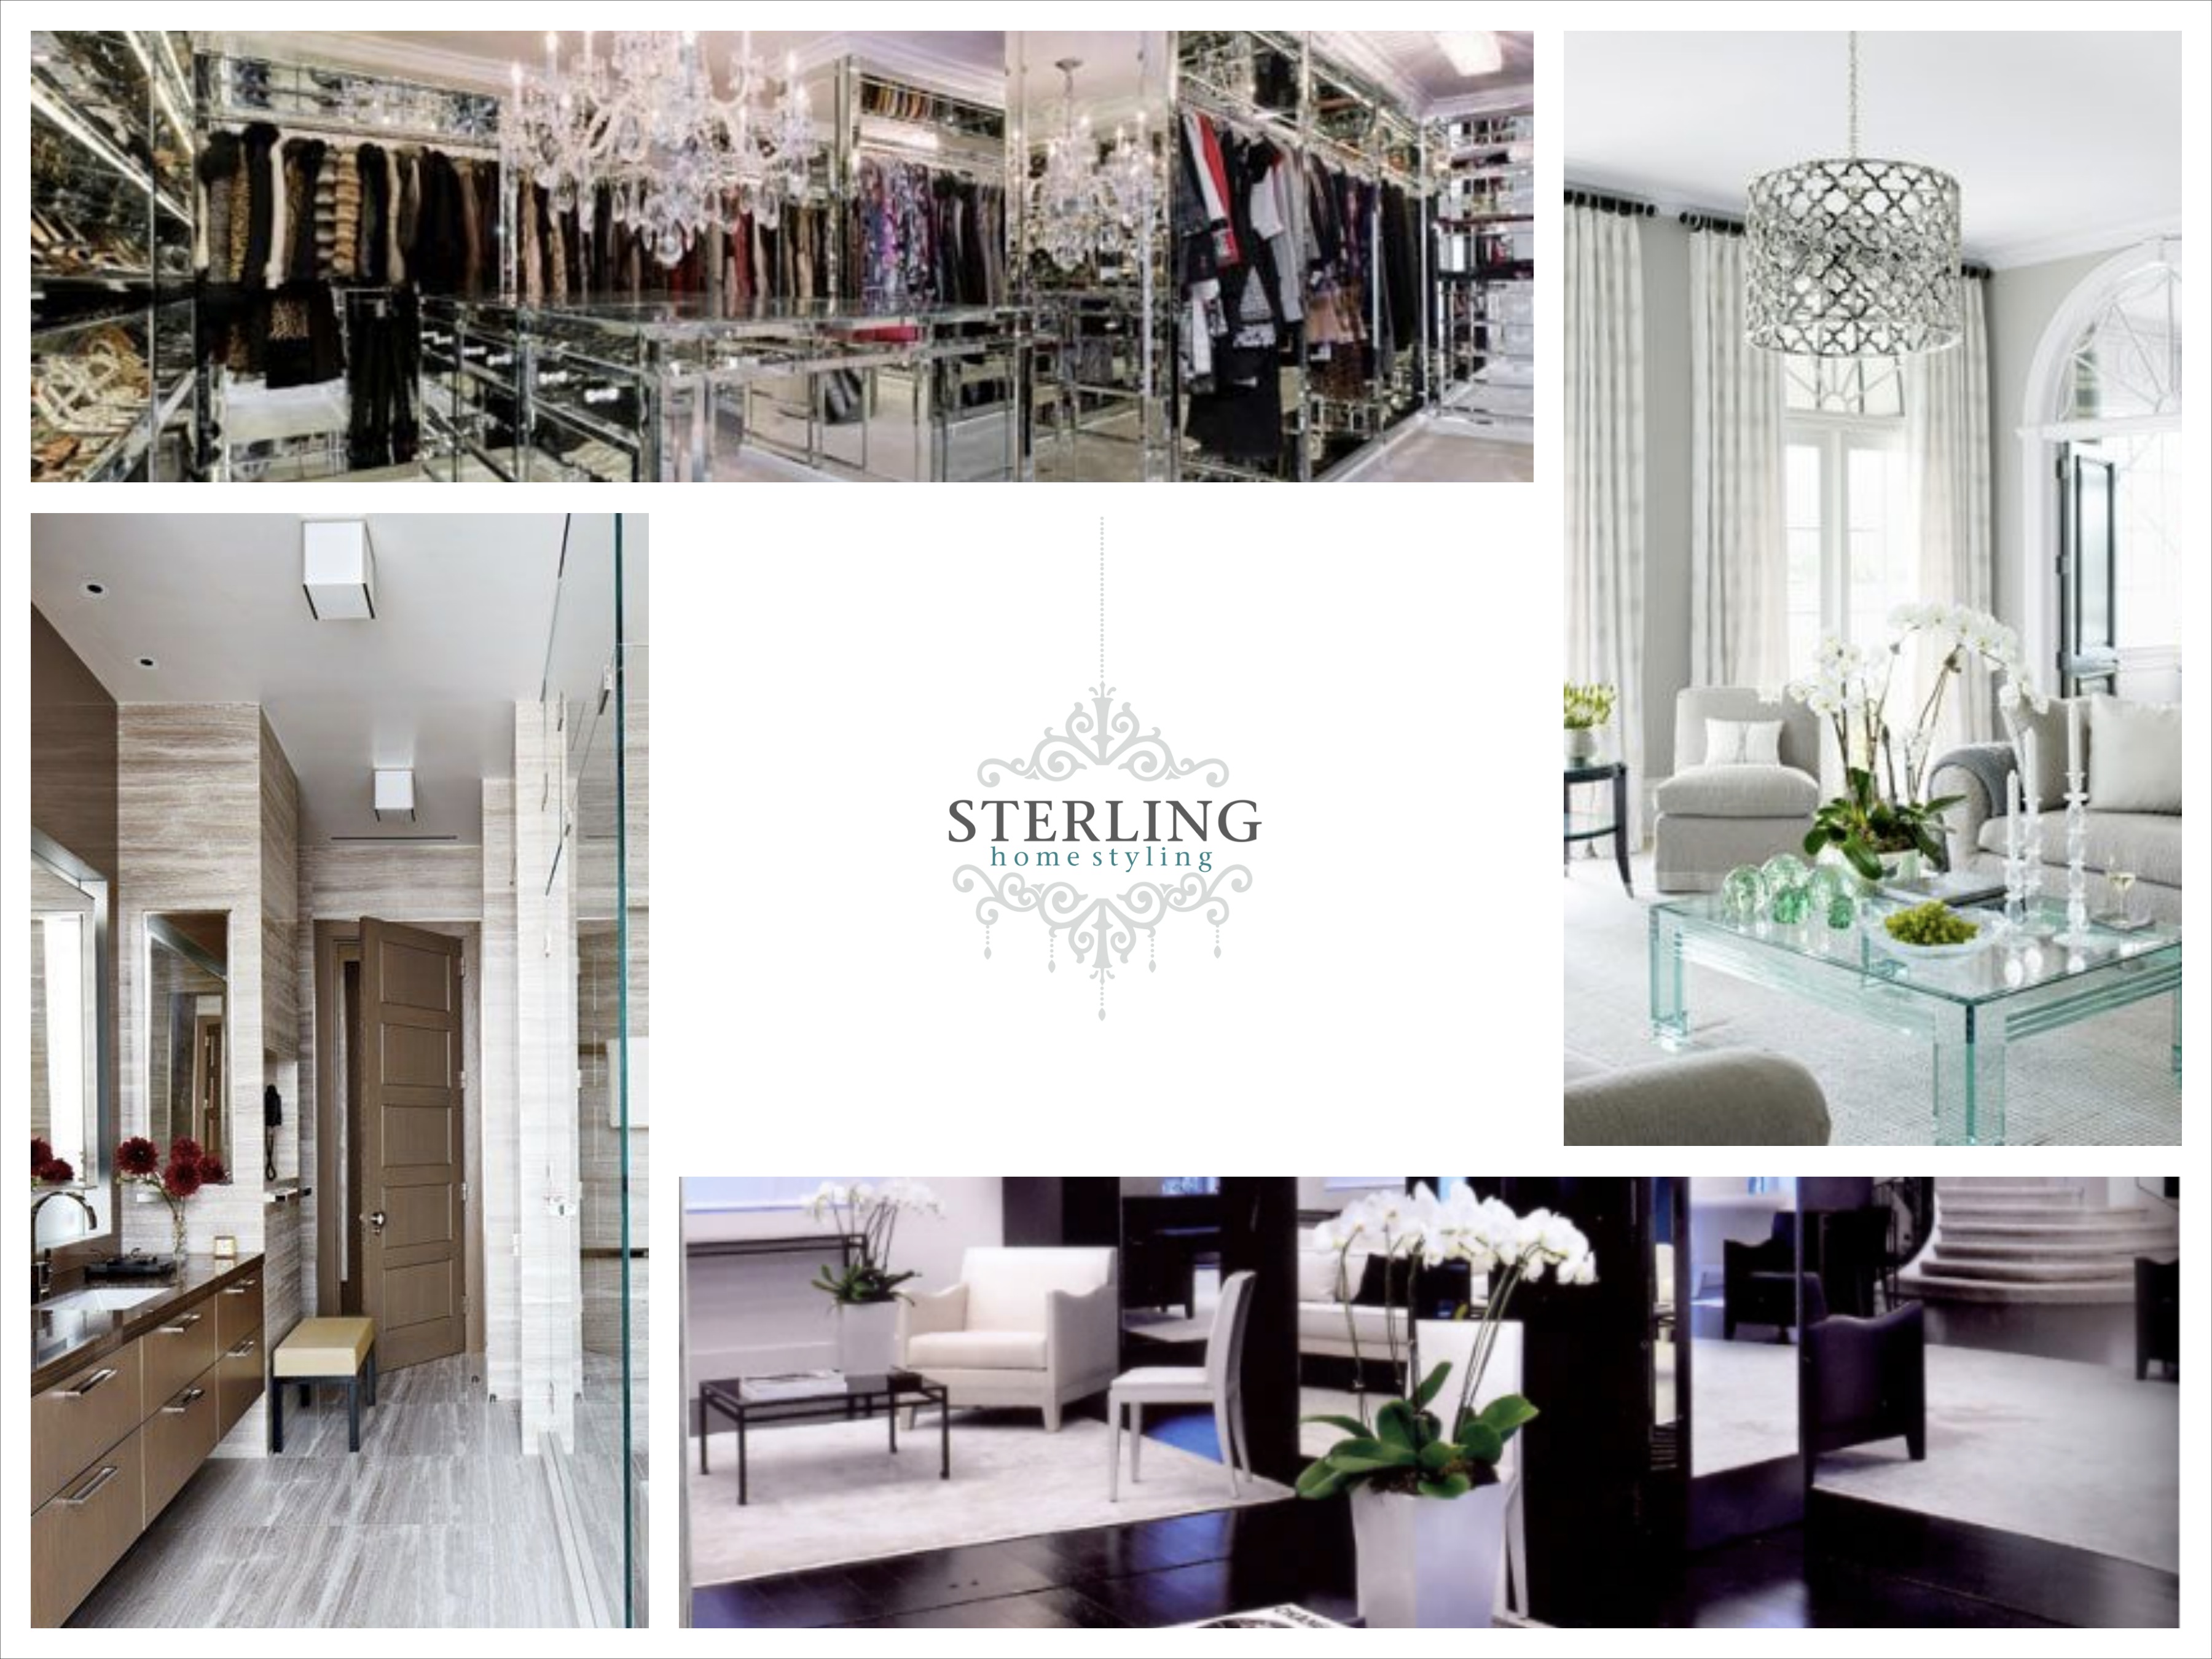 2-Day Home Staging to Sell Training Course for Realtors in Dubai – Conducted By Sterling Home Styling